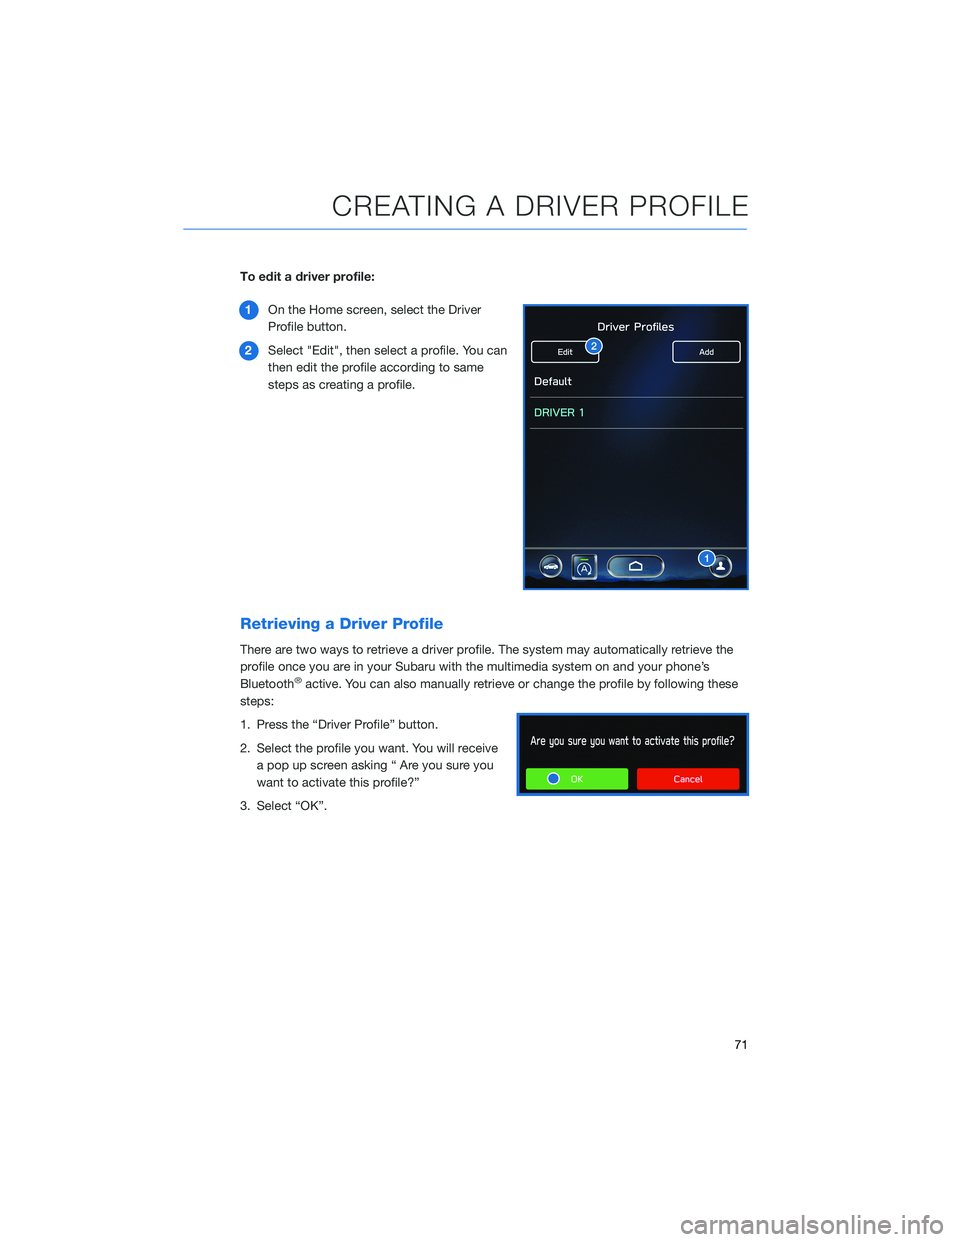 SUBARU LEGACY 2021  Getting Started Guide To edit a driver profile:
1On the Home screen, select the Driver
Profile button.
2Select "Edit", then select a profile. You can
then edit the profile according to same
steps as creating a prof